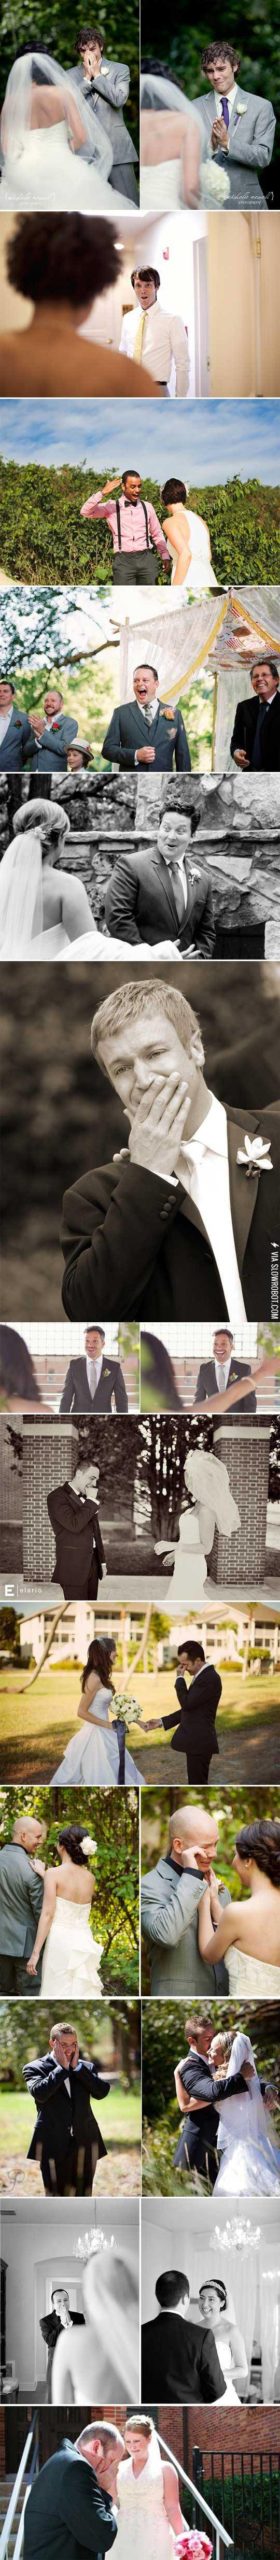 Grooms+Blown+Away+By+Their+Gorgeous+Brides